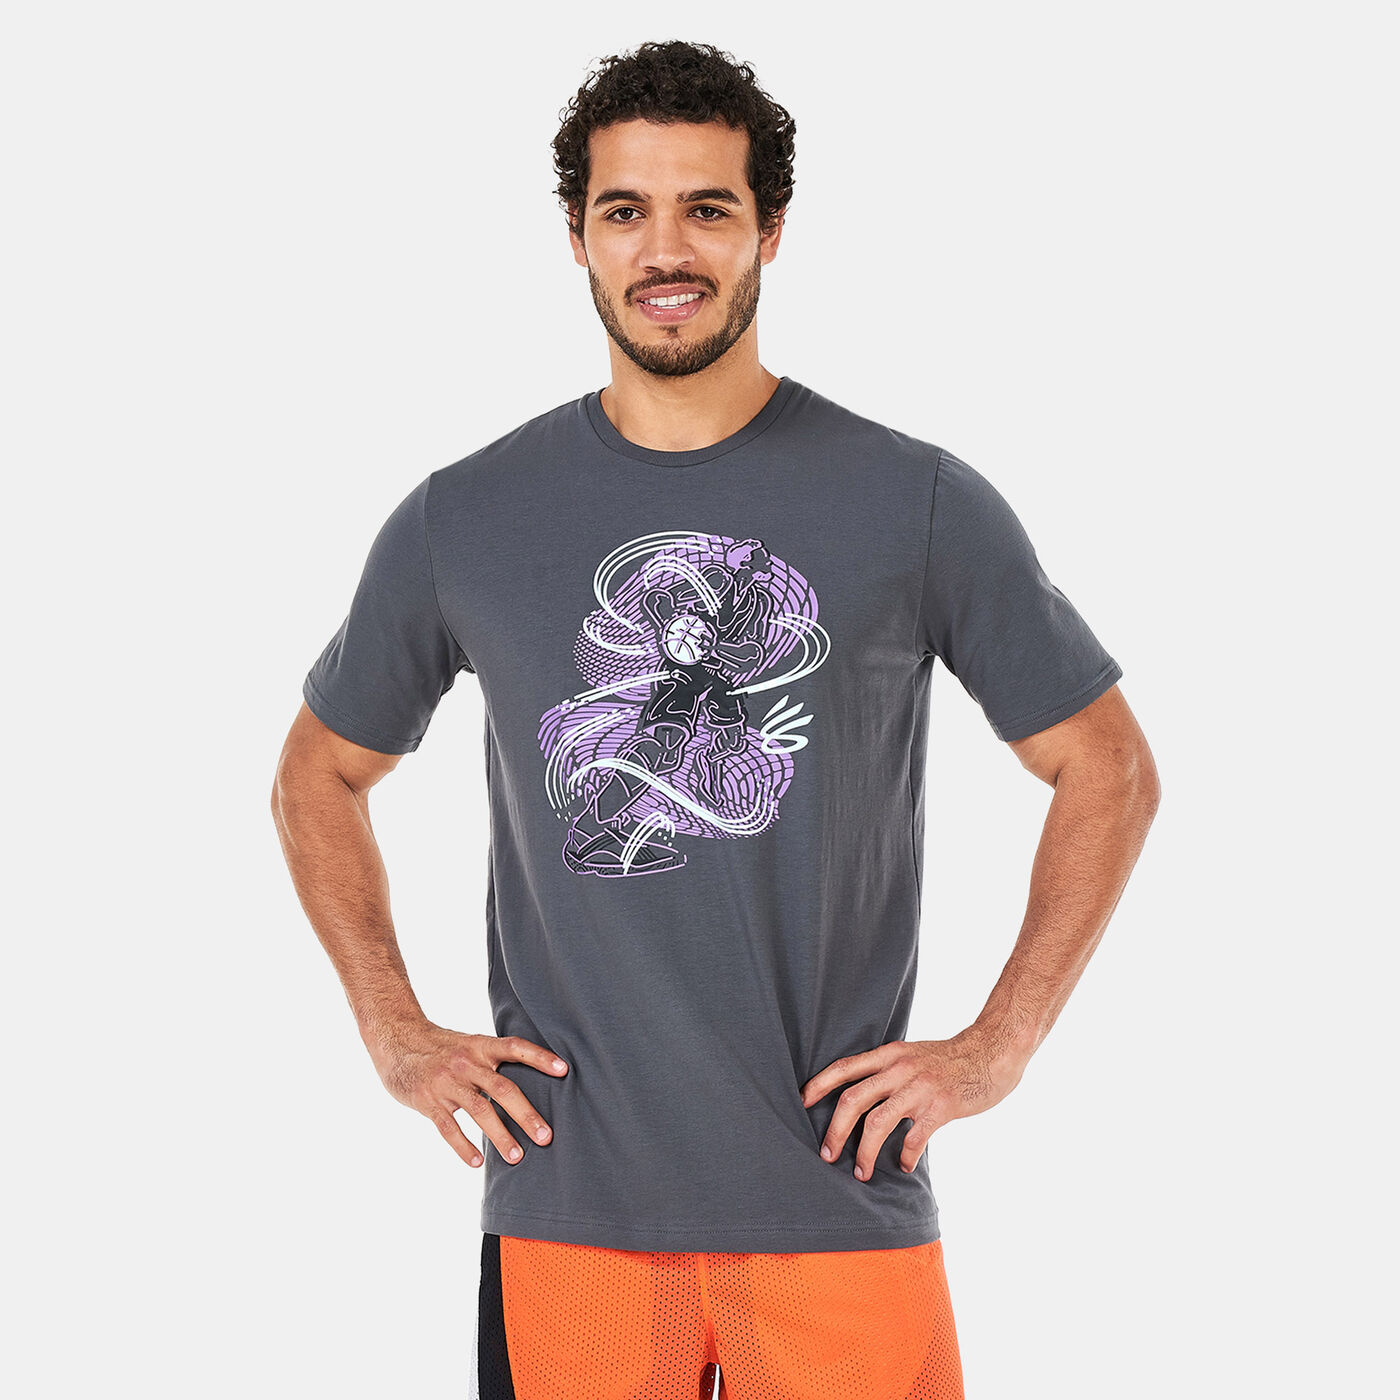 Men's Curry Animated Sketch T-Shirt